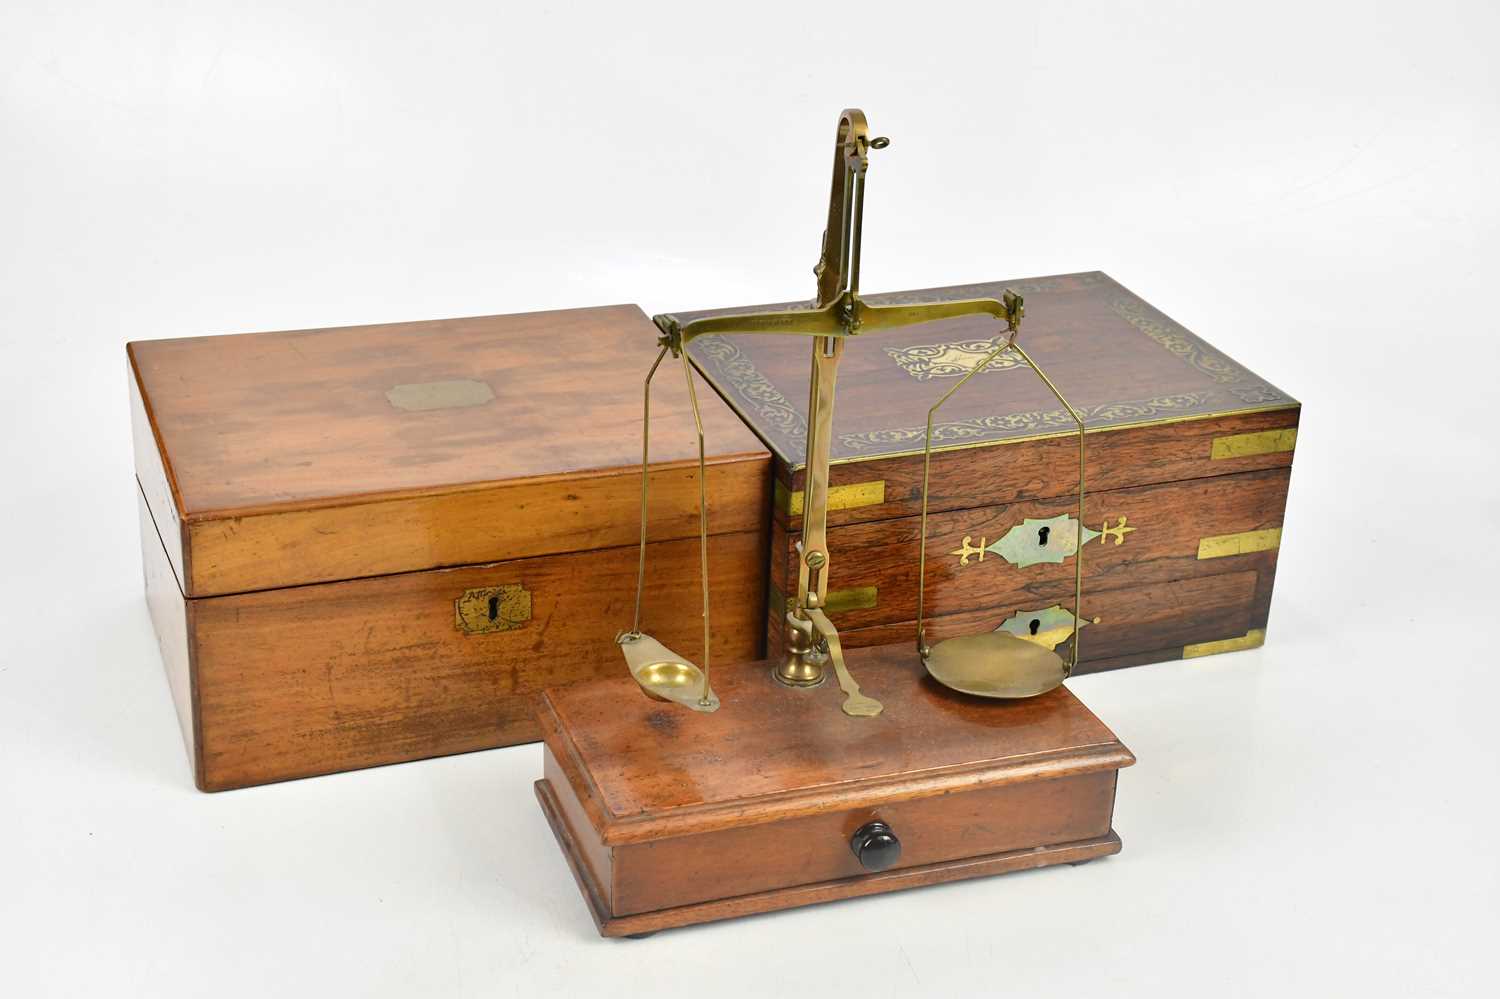 A William IV brass inlaid rosewood work box, lacking interior, length 30cm, with a walnut writing